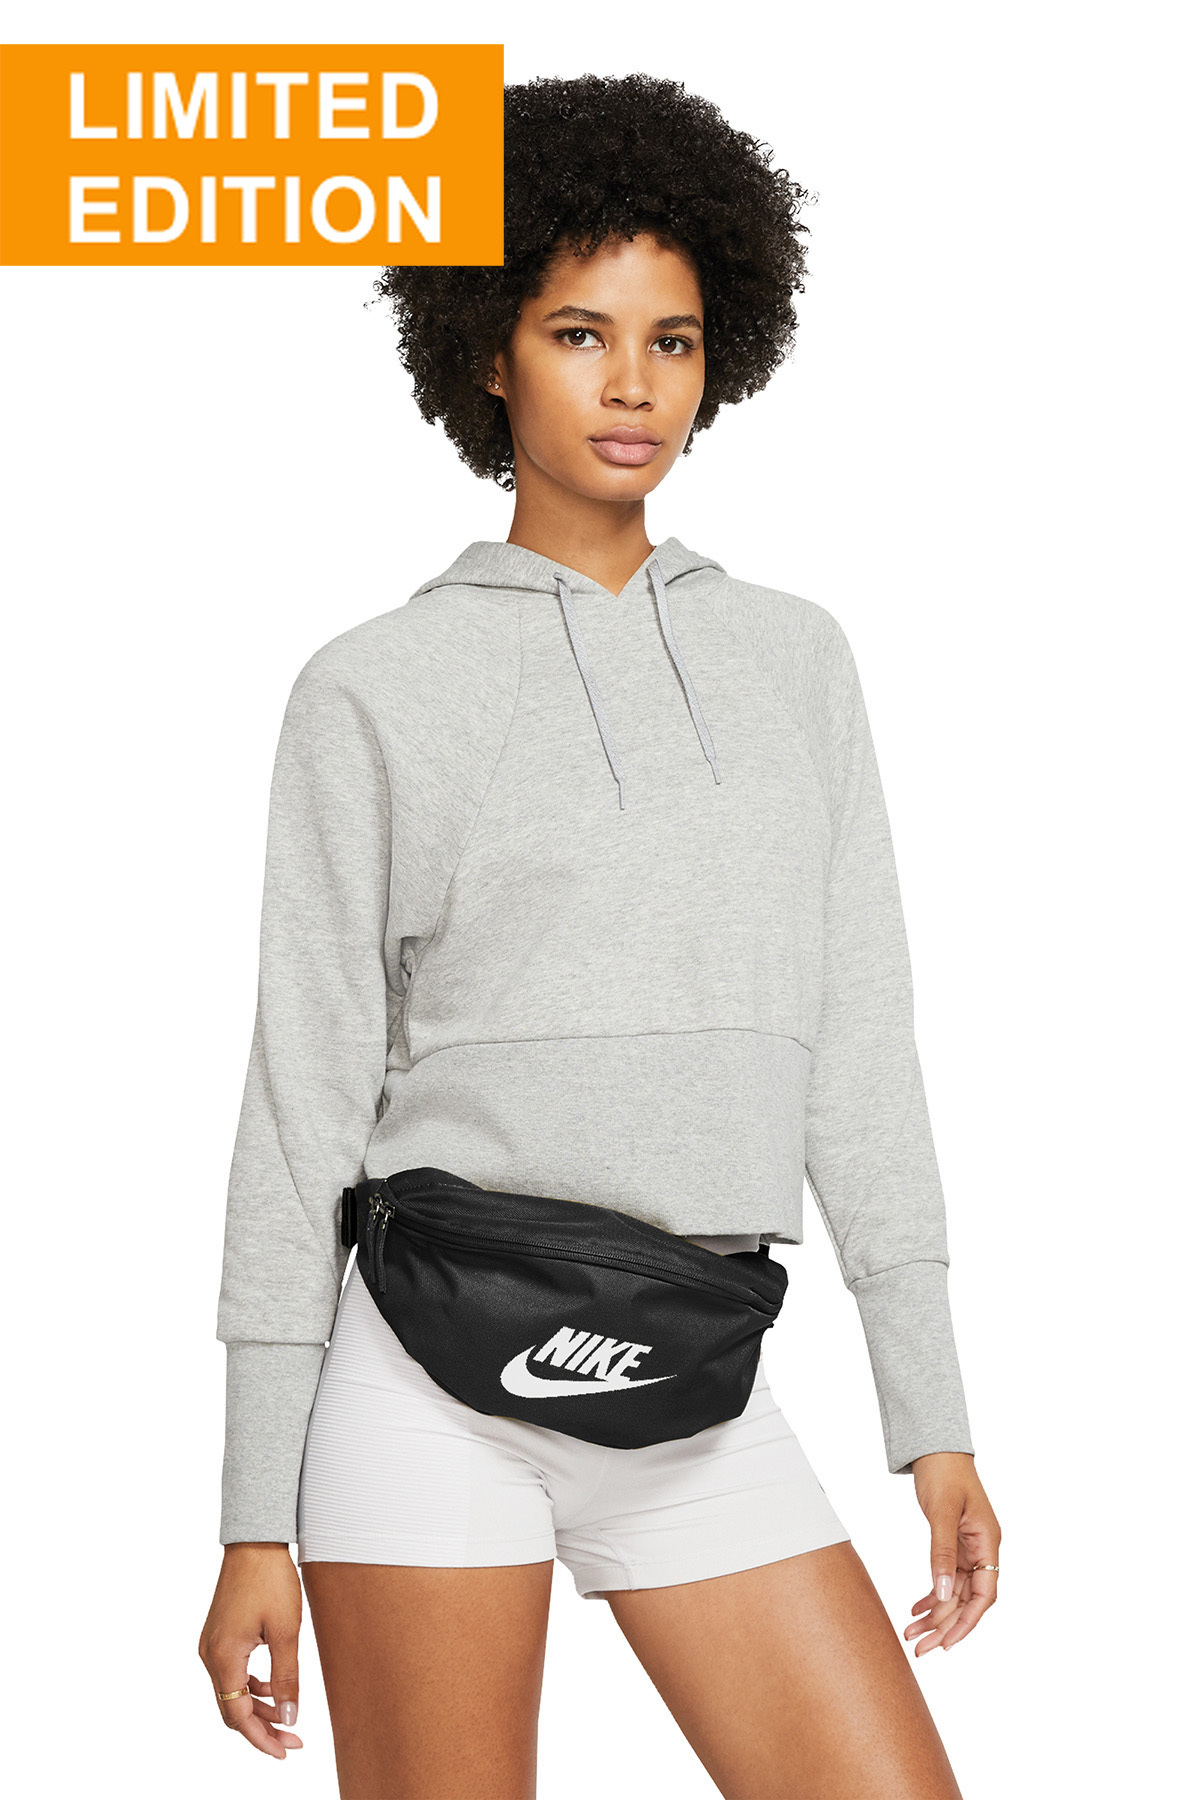 nike limited edition bags